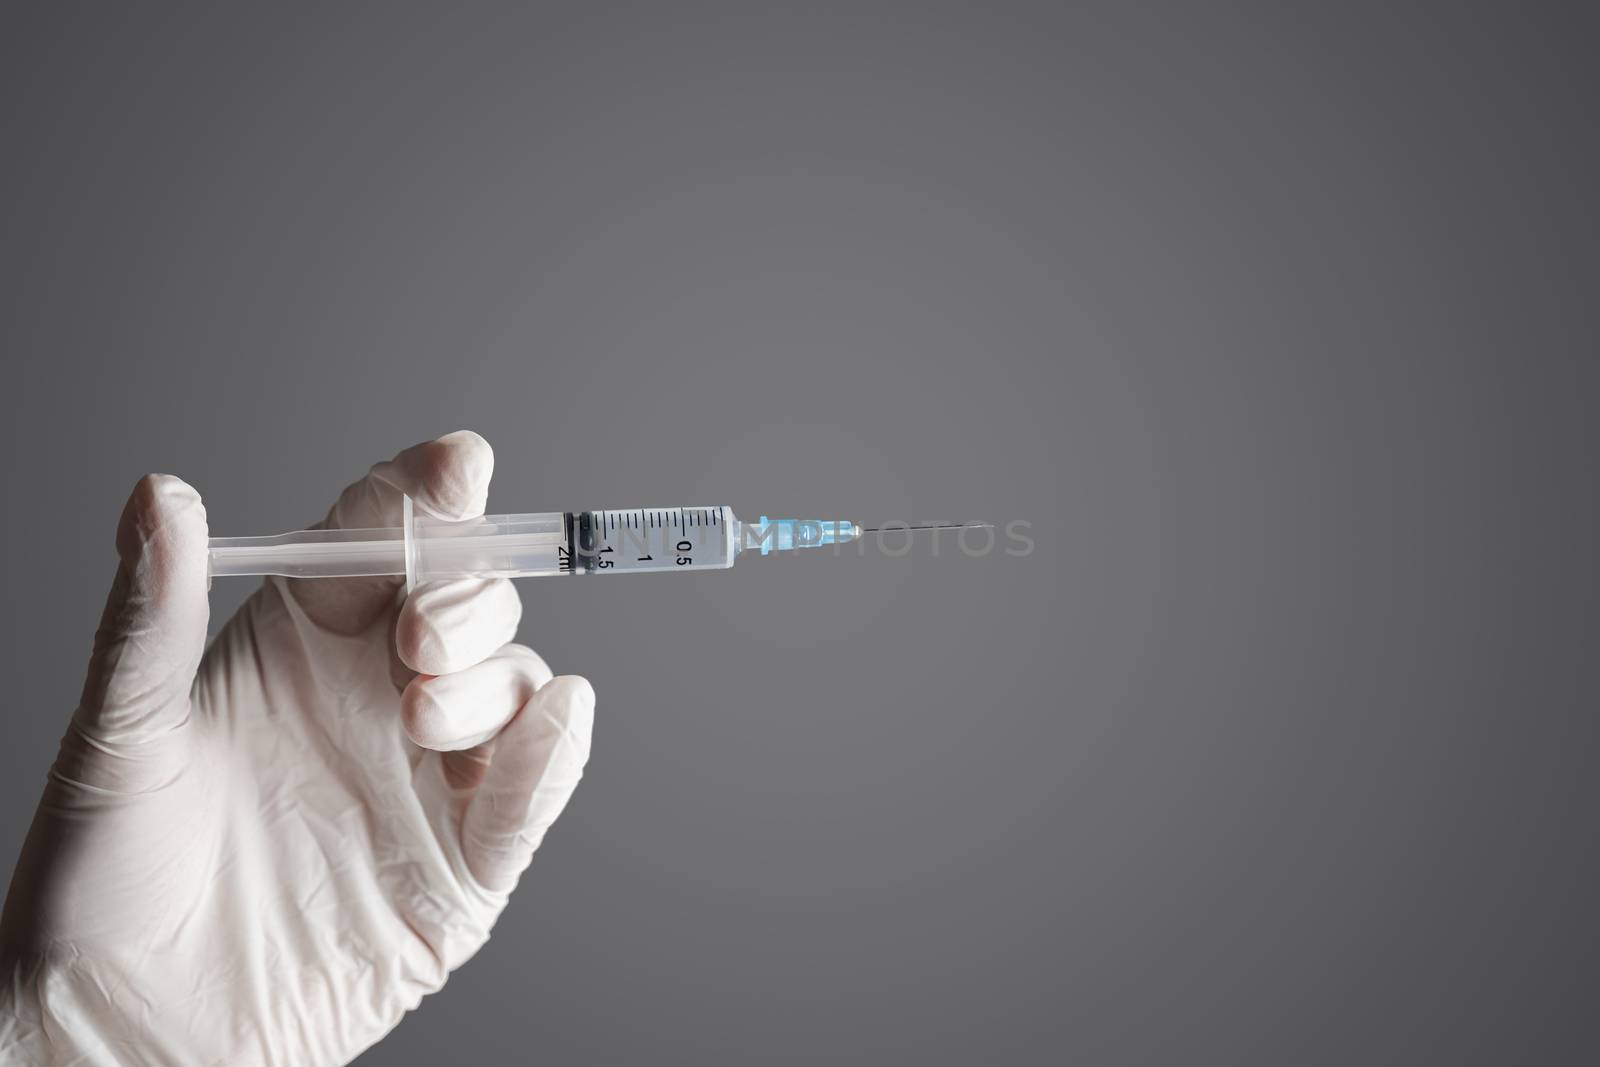 Injection ready for application in doctor's hand. Hand in glove holding a syringe with intravenous injection, concept of medical treatment or vaccination